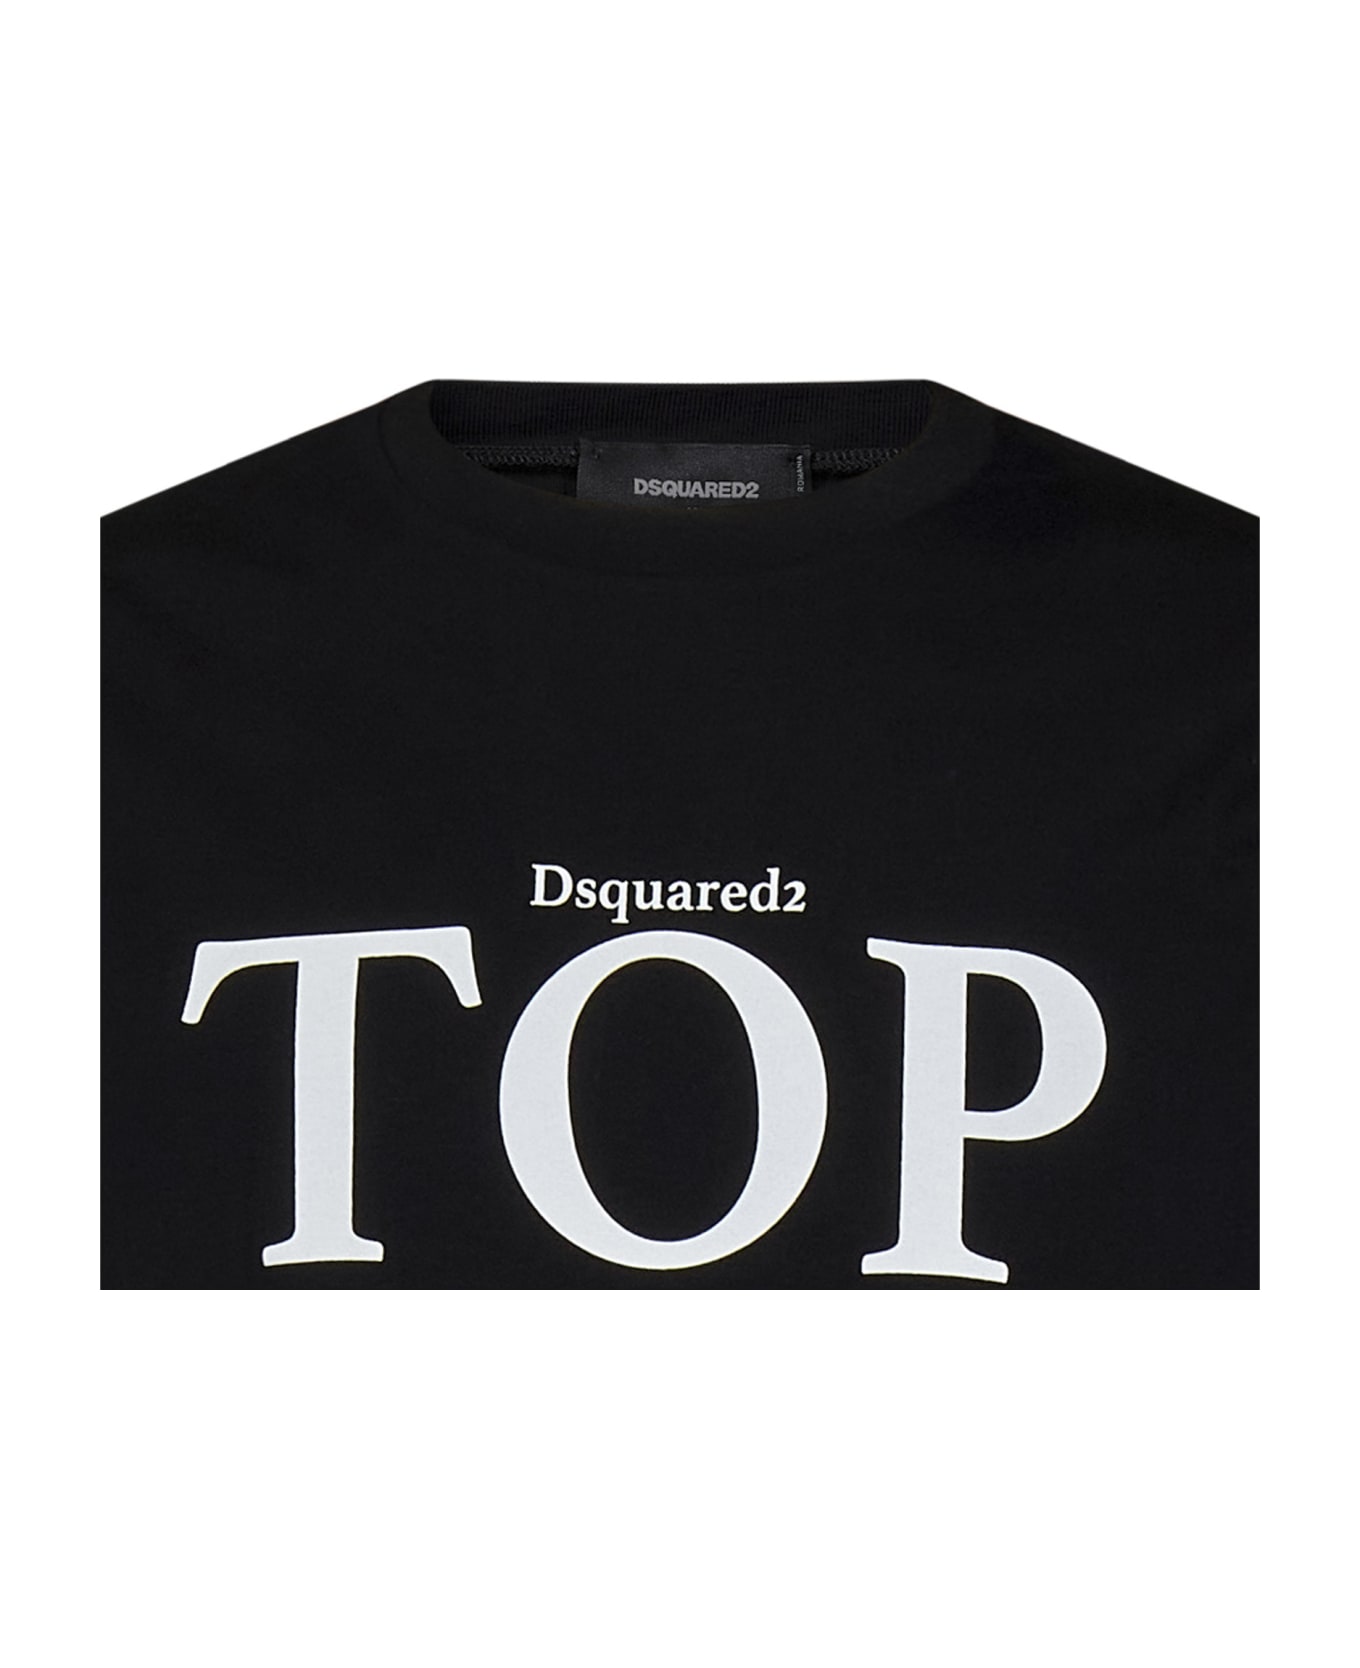 Dsquared2 Top Cool Fit T-shirt - Black シャツ